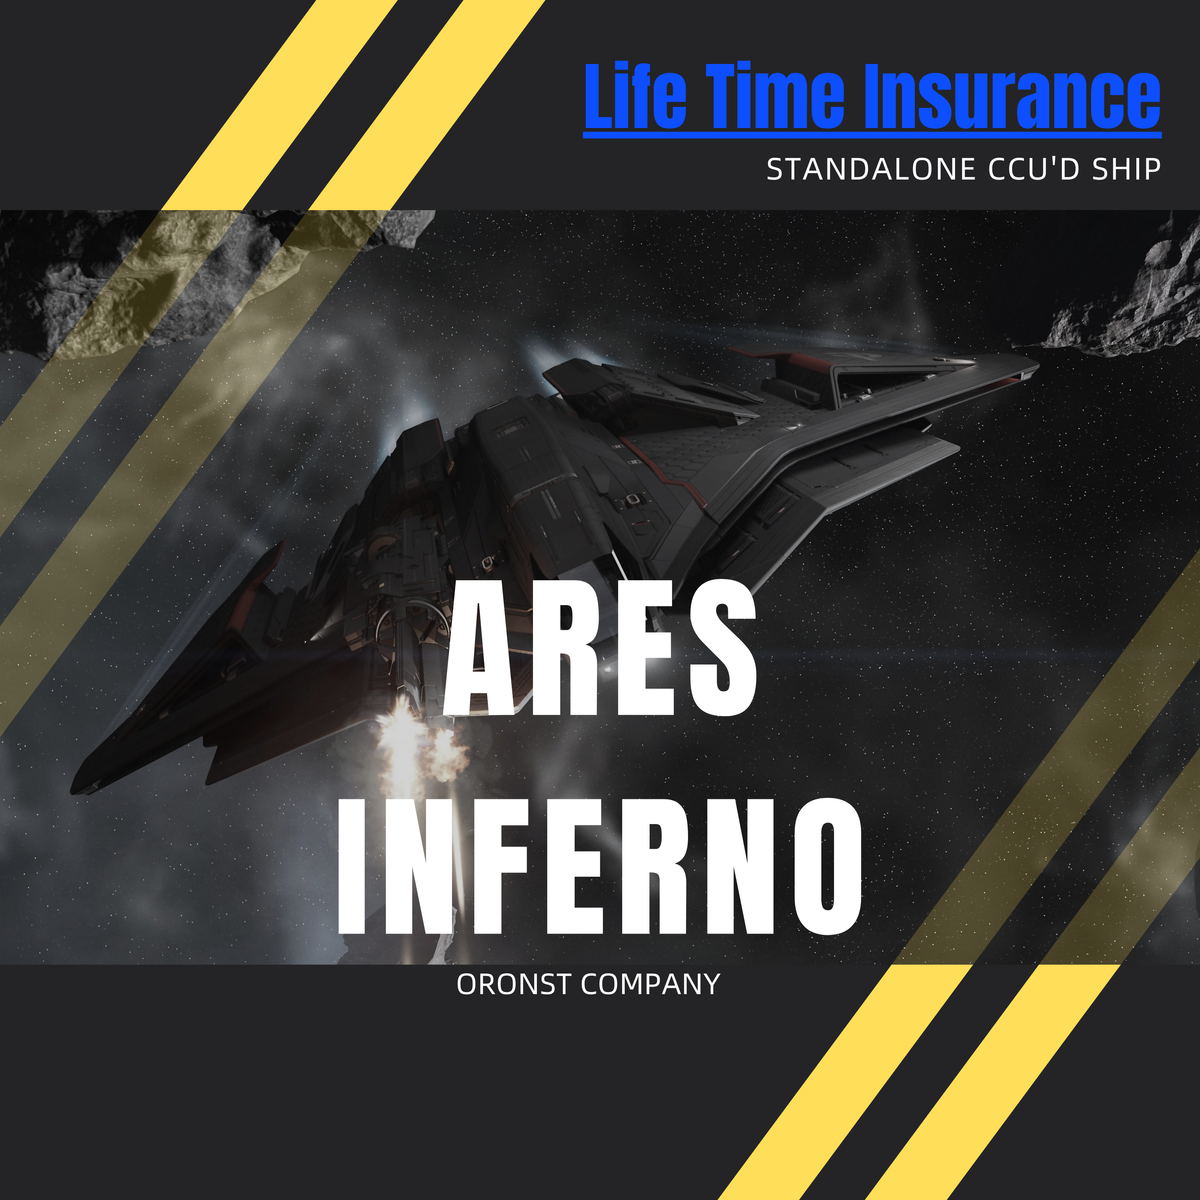 Ares Inferno - LTI